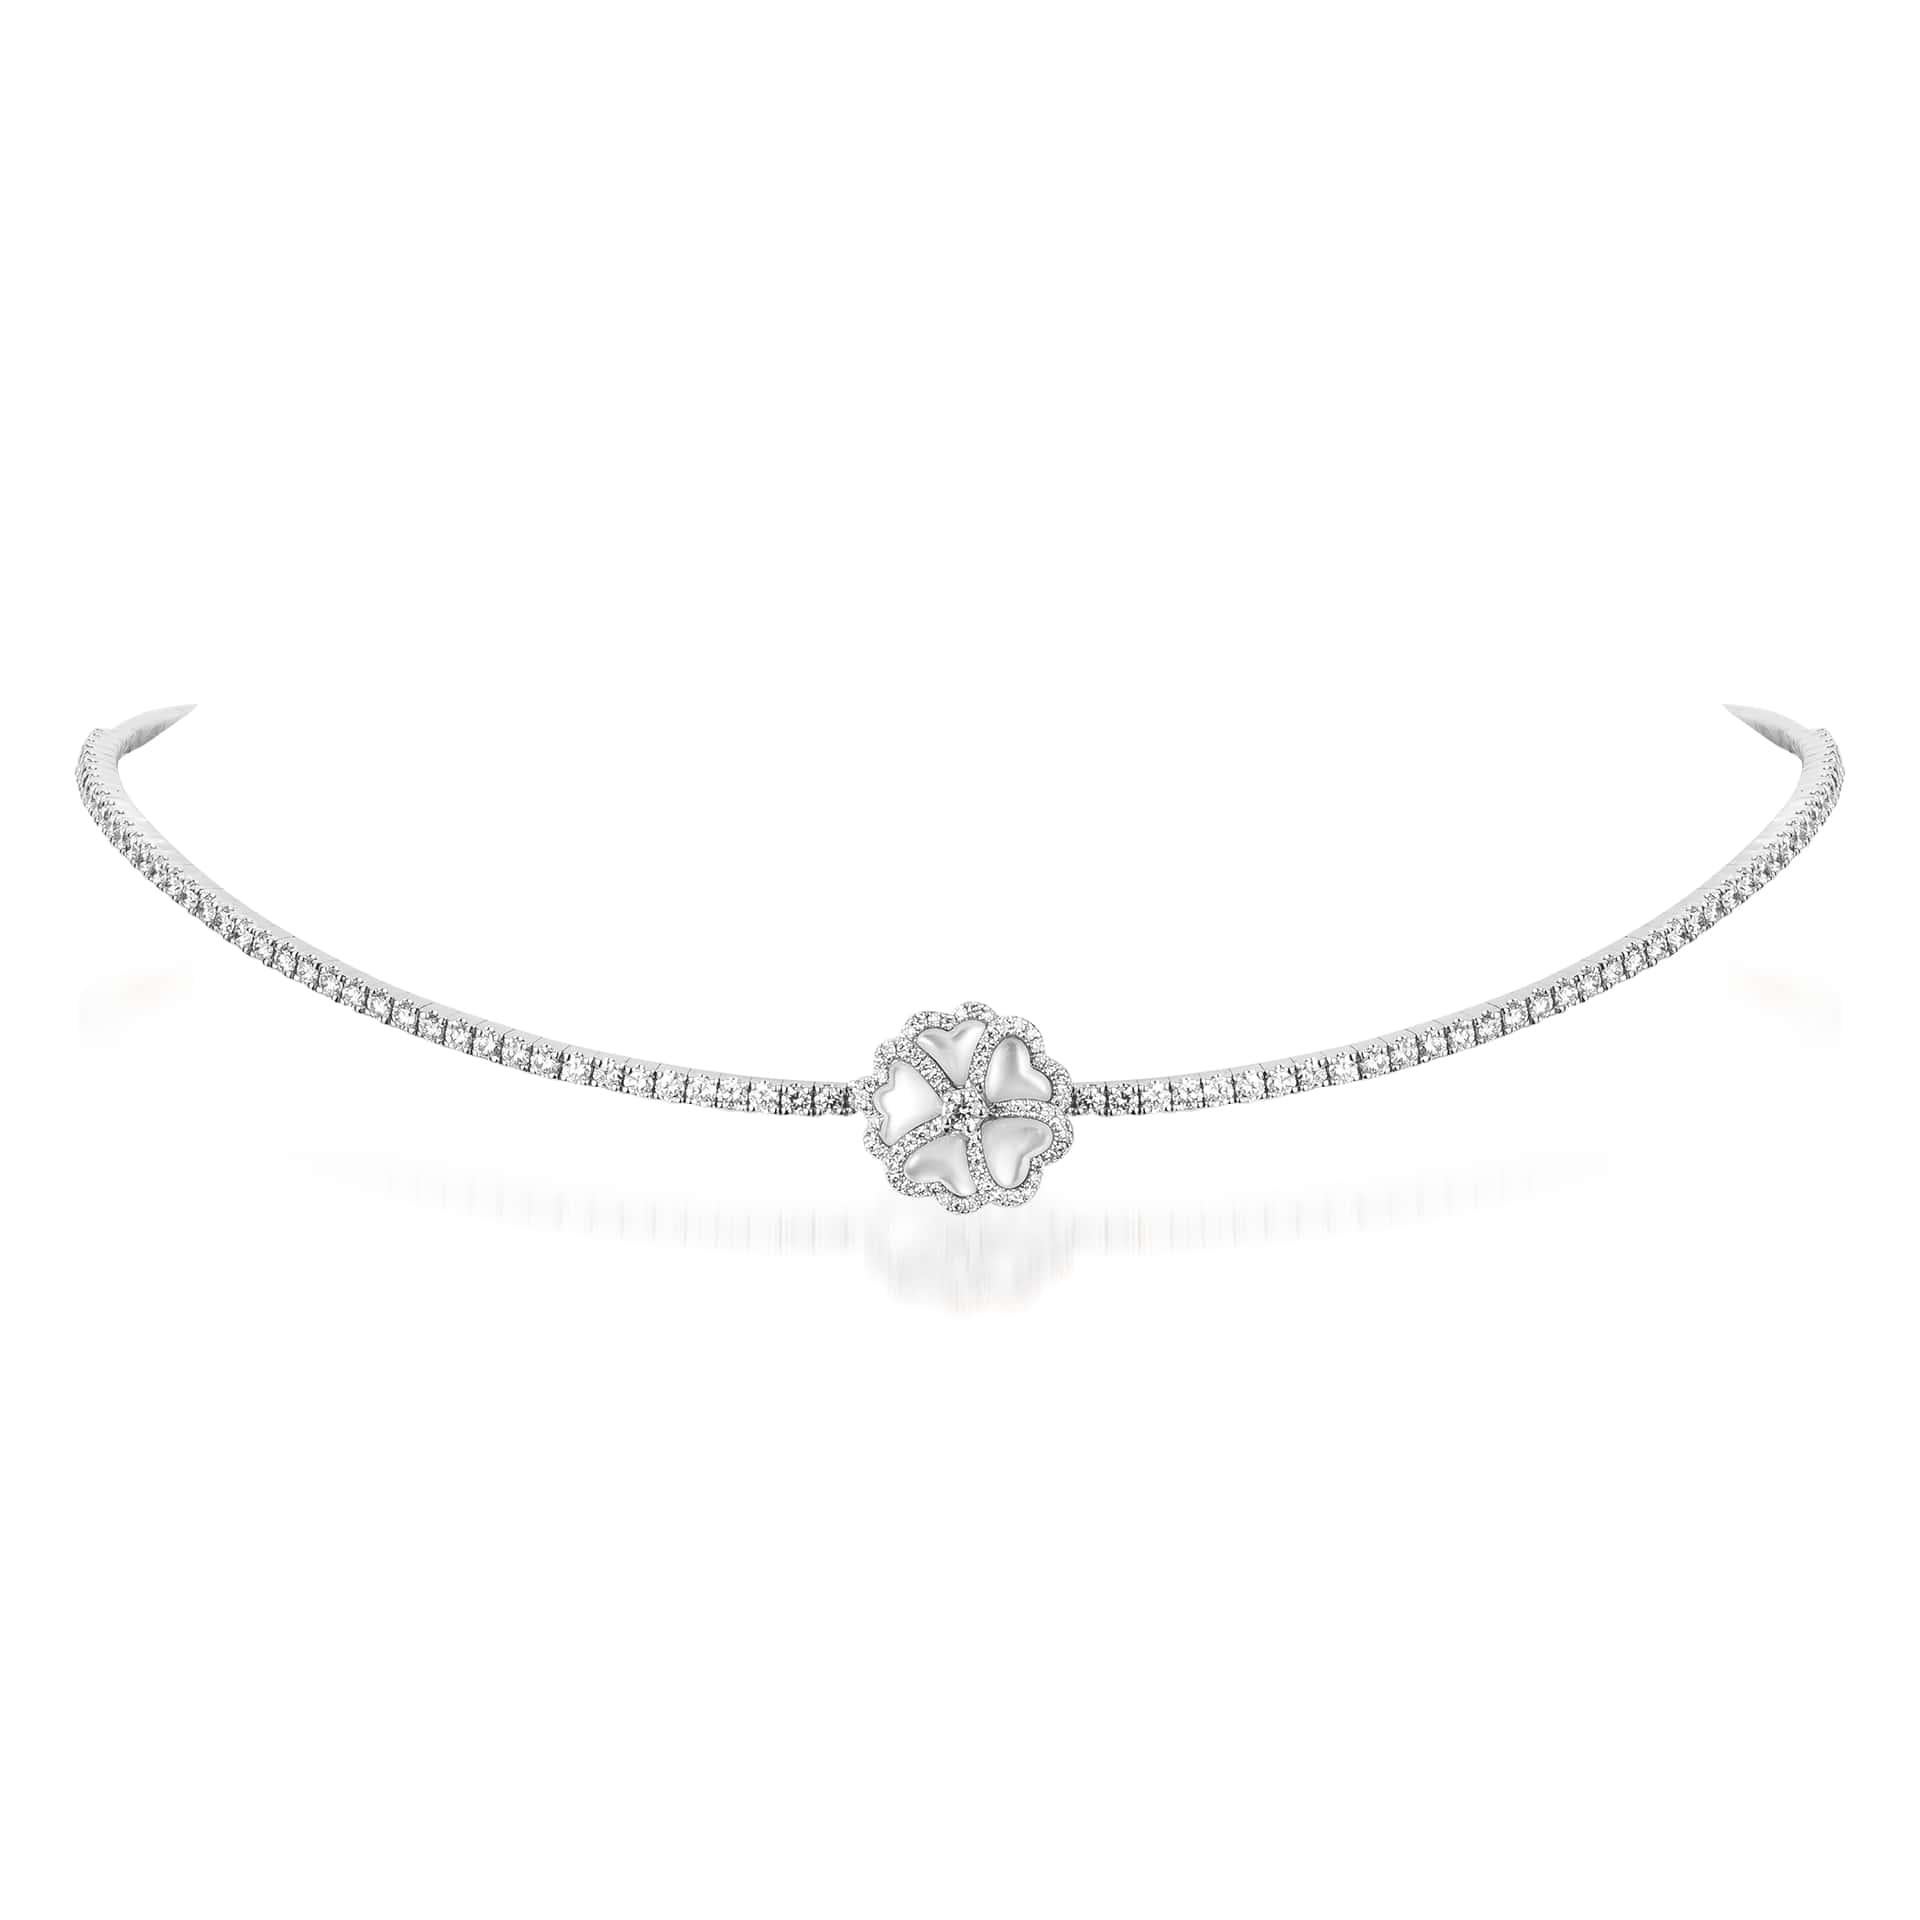 Bloom Diamond and Mother-of-Pearl Flower Choker Necklace in 18K White Gold

Inspired by the exquisite petals of the alpine cinquefoil flower, the Bloom collection combines the richness of diamonds and precious metals with the light versatility of